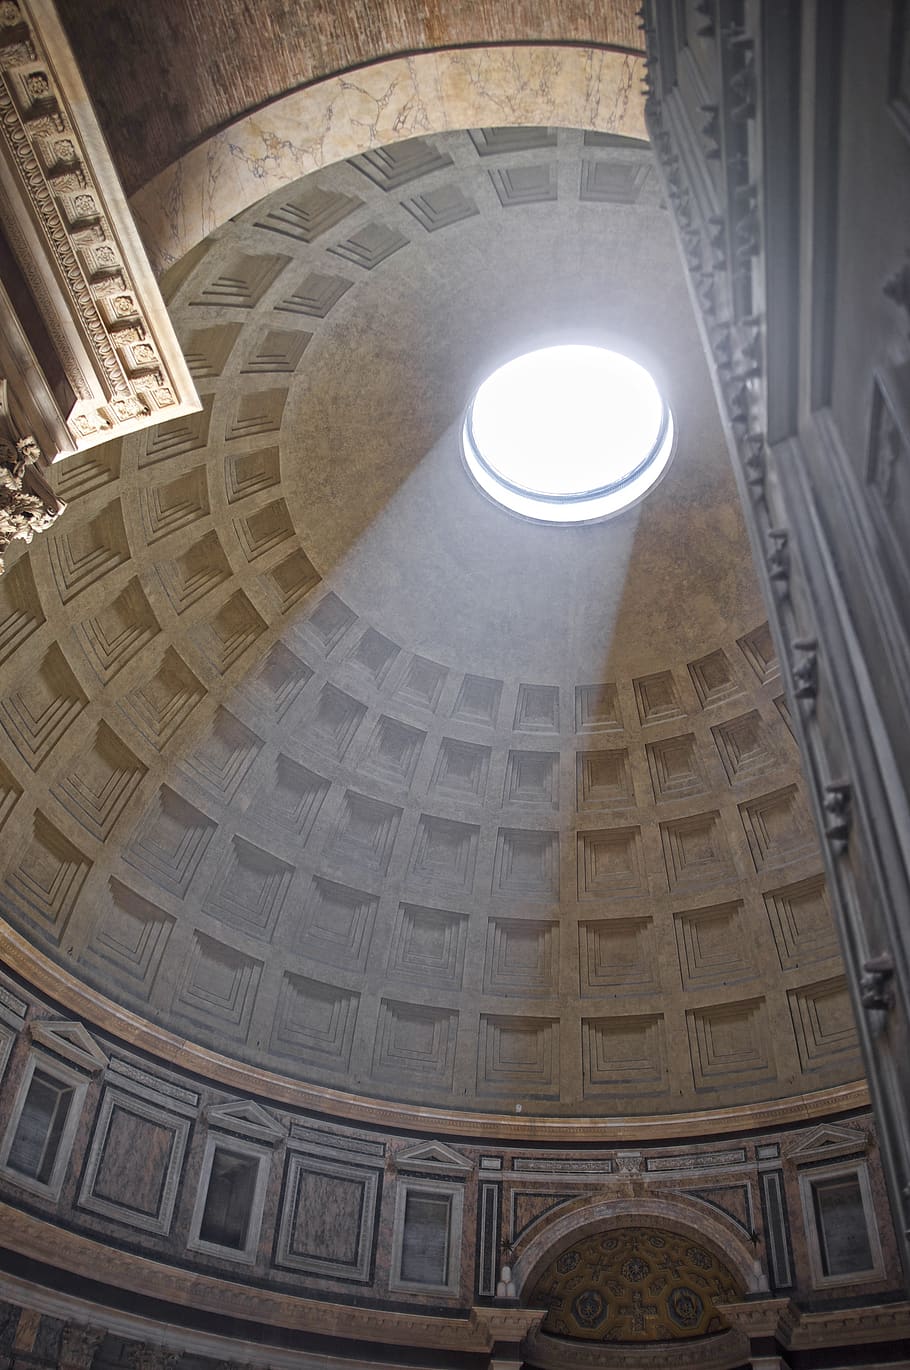 pantheon, architecture, ancient, building, italy, europe, rome, monument, temple, history